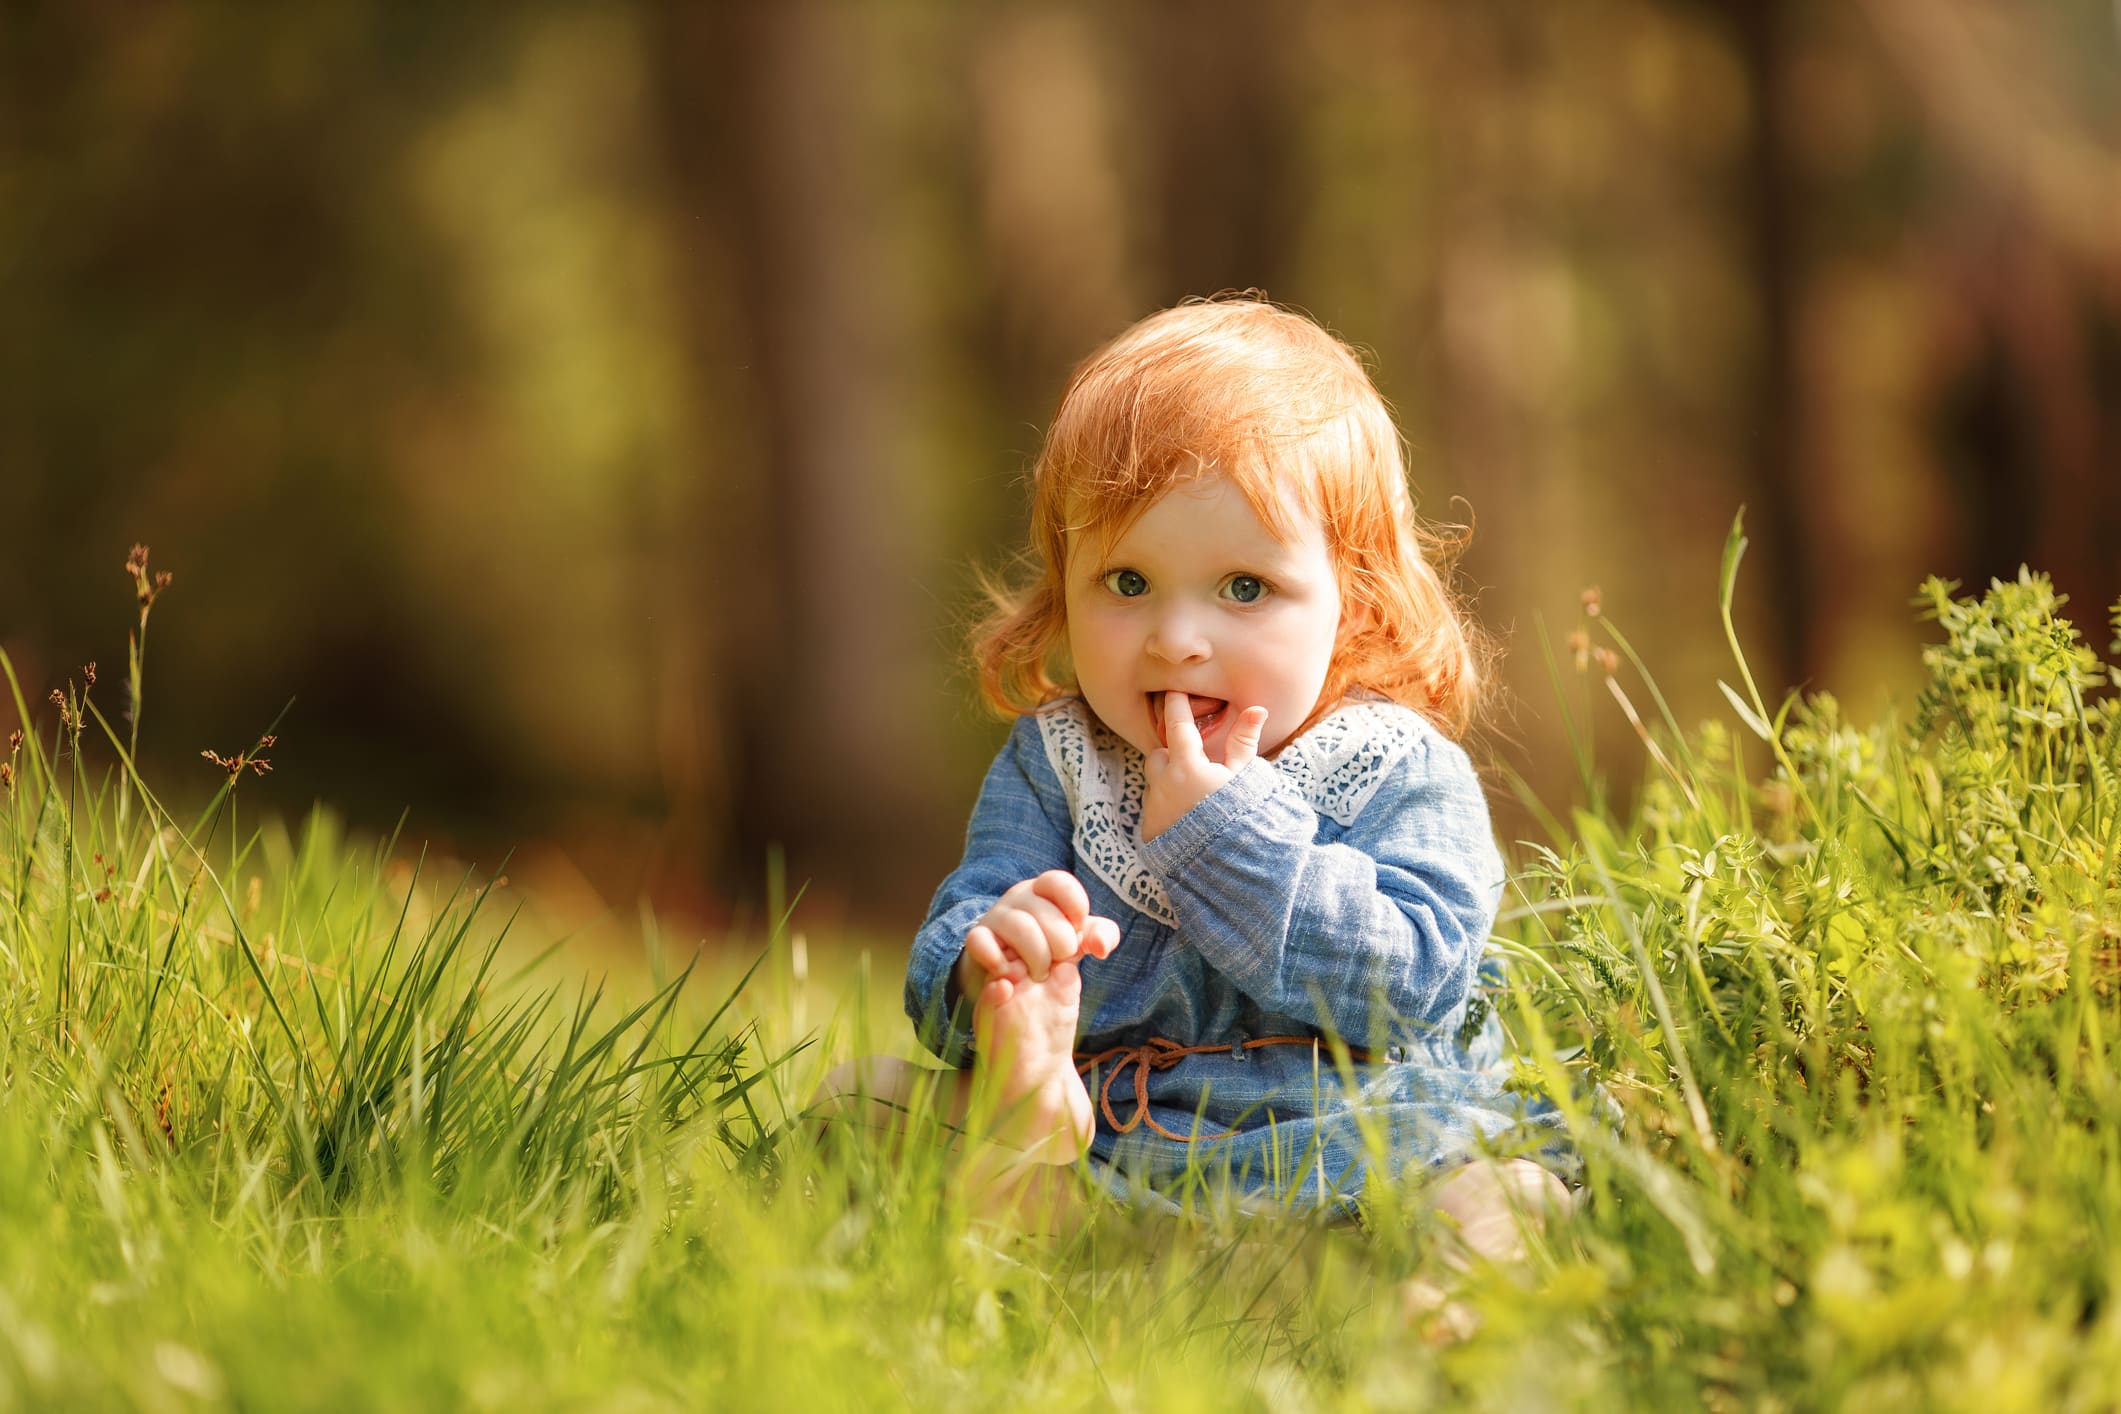 a baby girl with red hair and blue eyes sitting in a field of grass